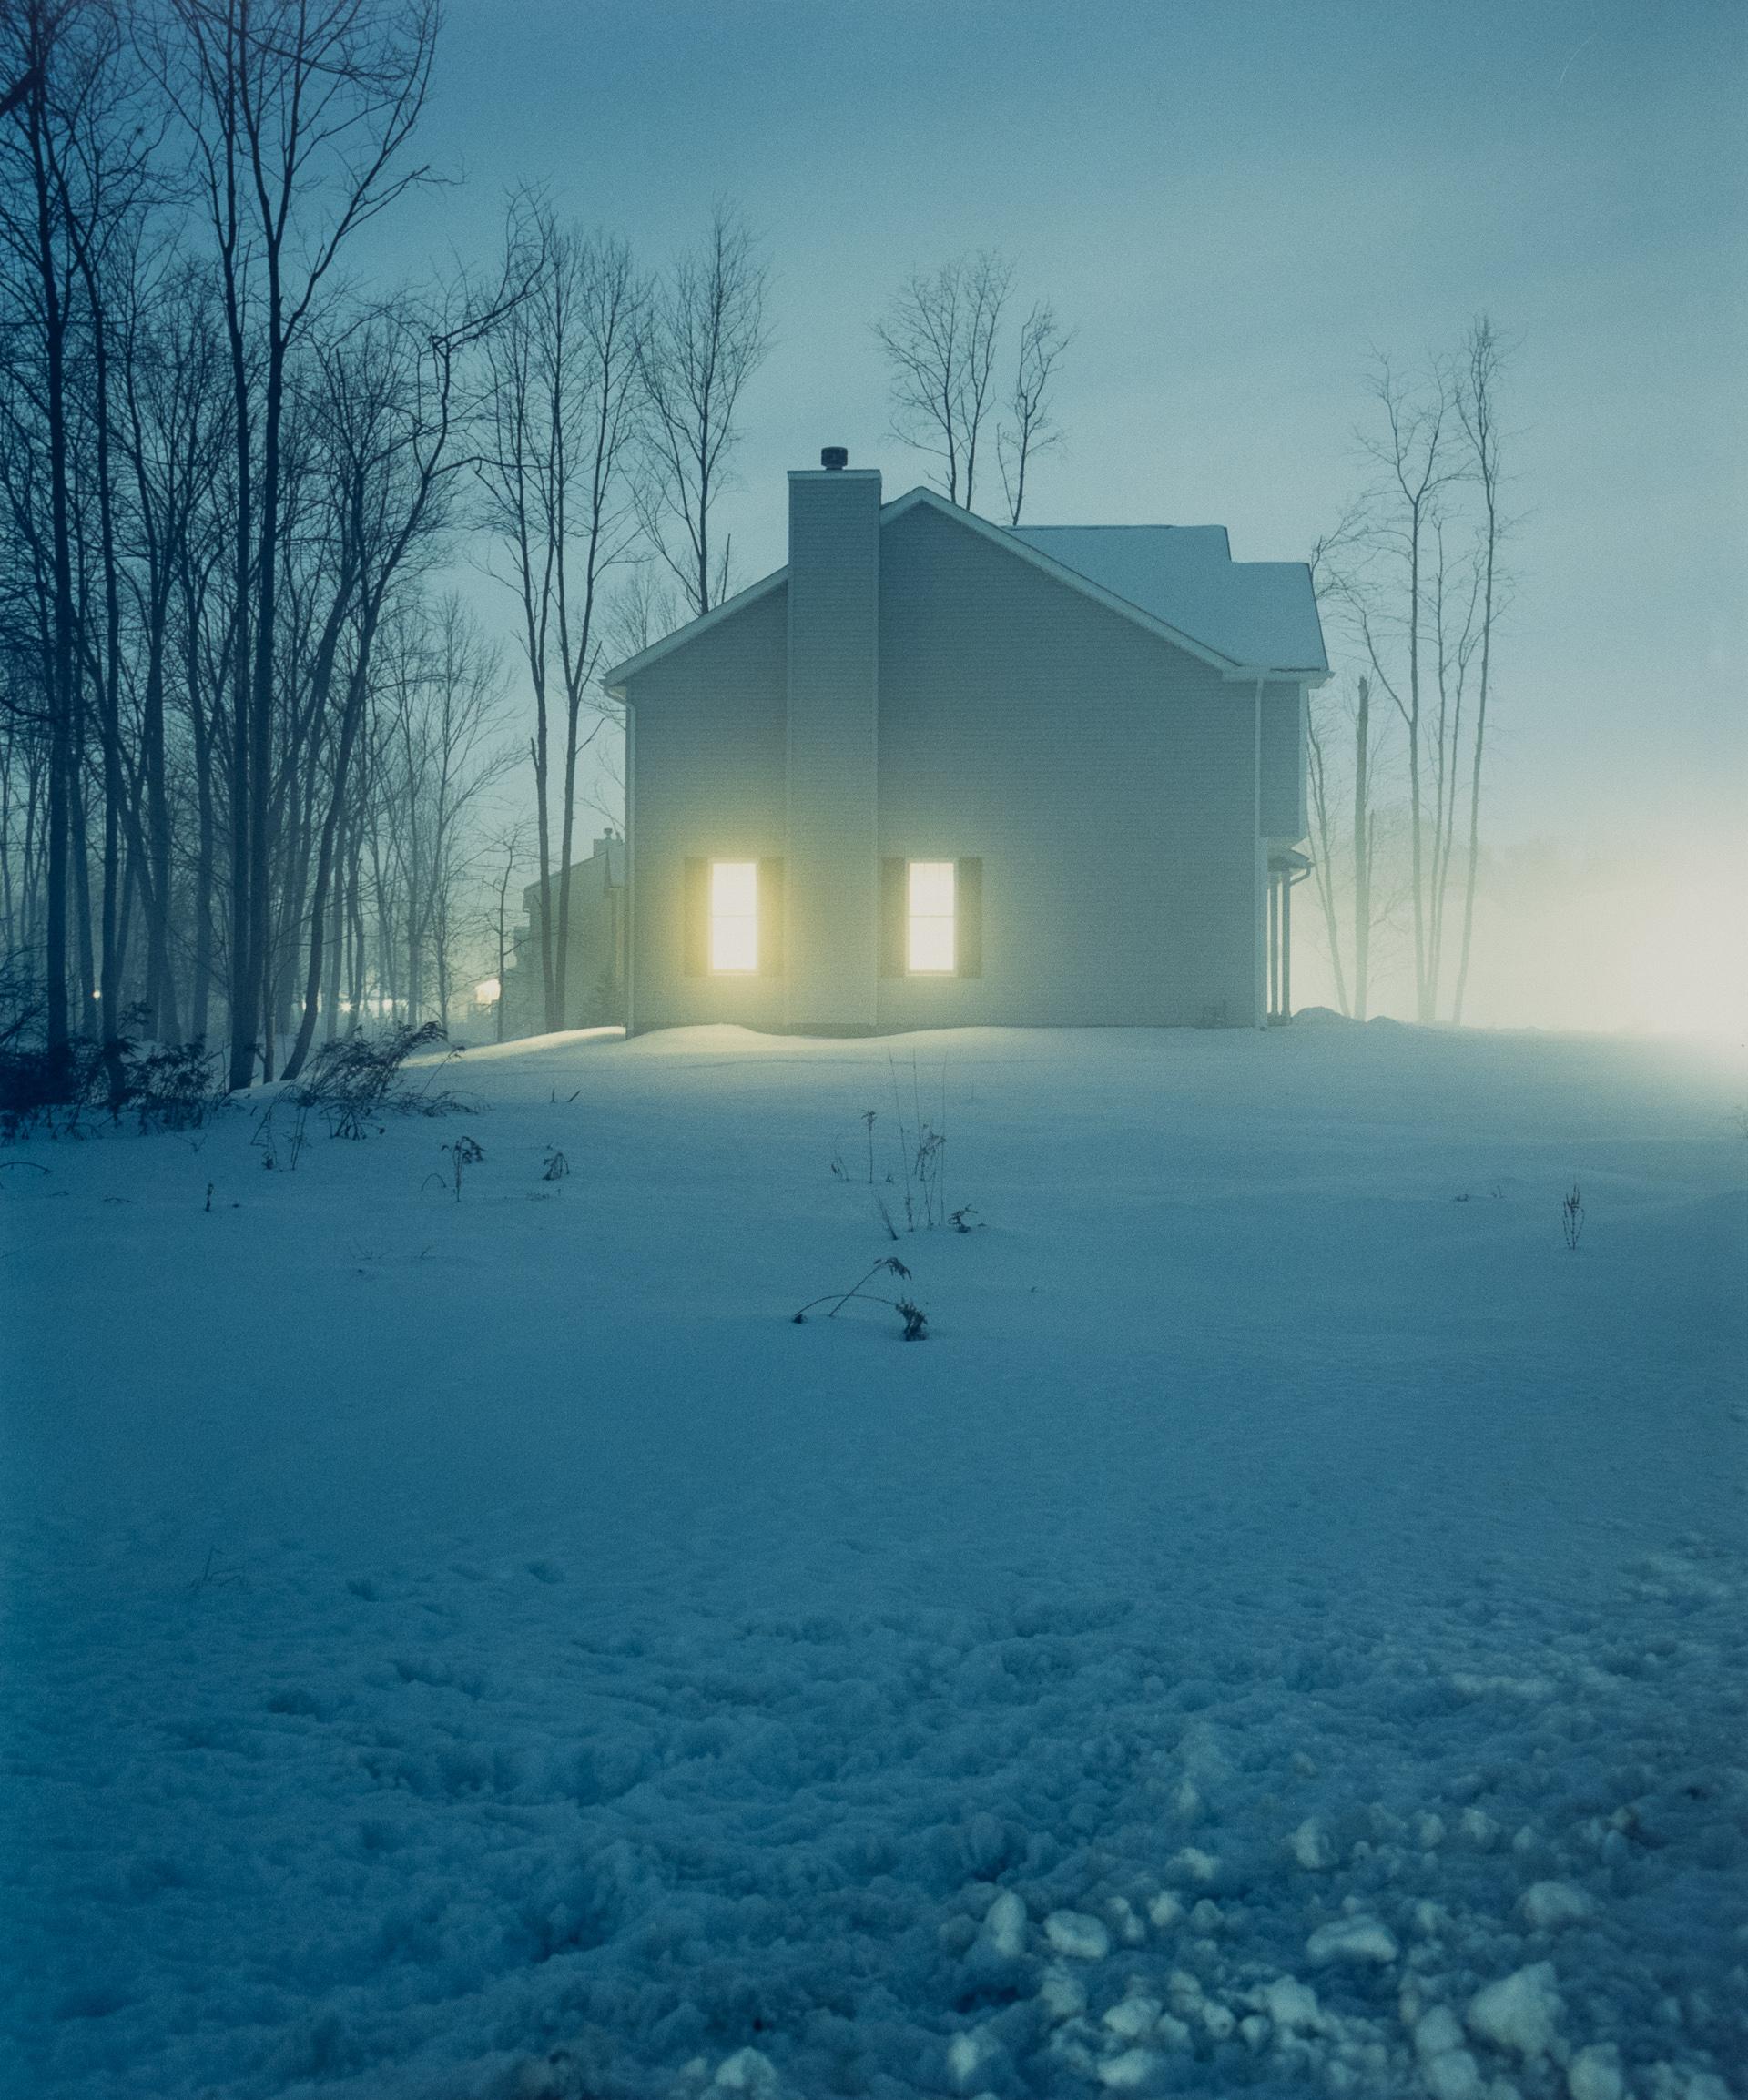 2423-A (from "House Hunting") - Photograph by Todd Hido